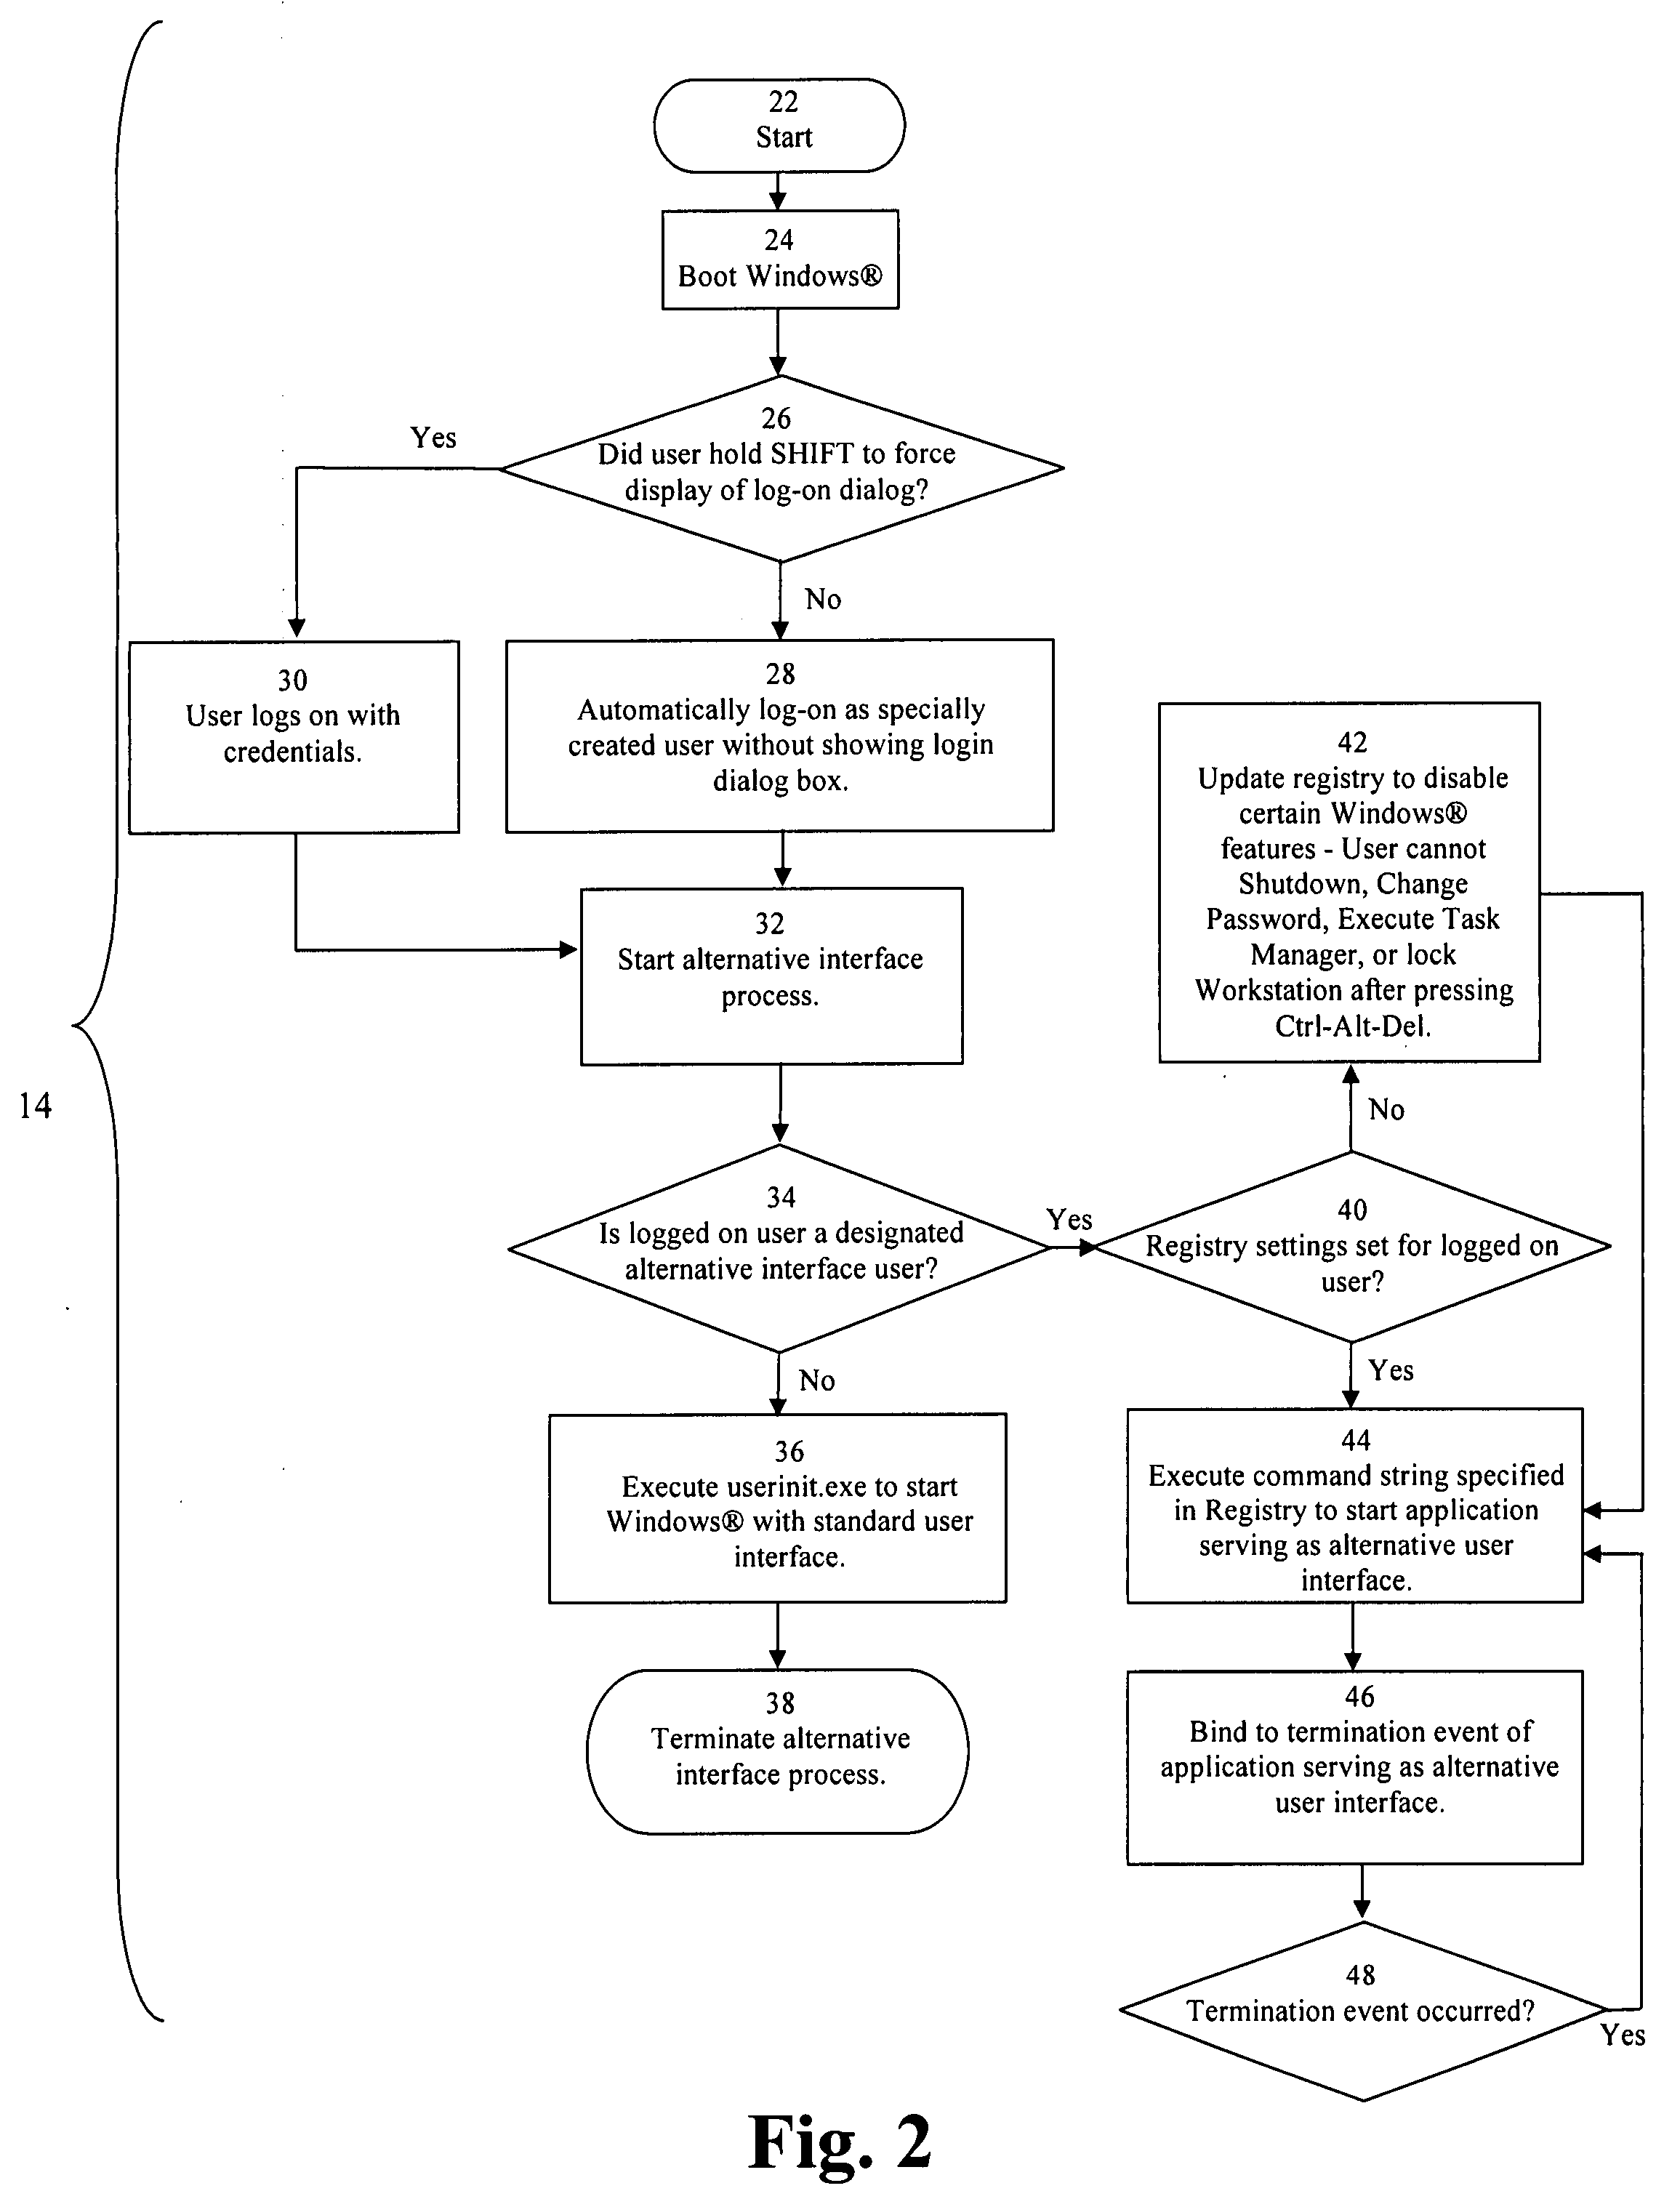 System and method for managing access to resources and functionality of client computers in a client/server environment